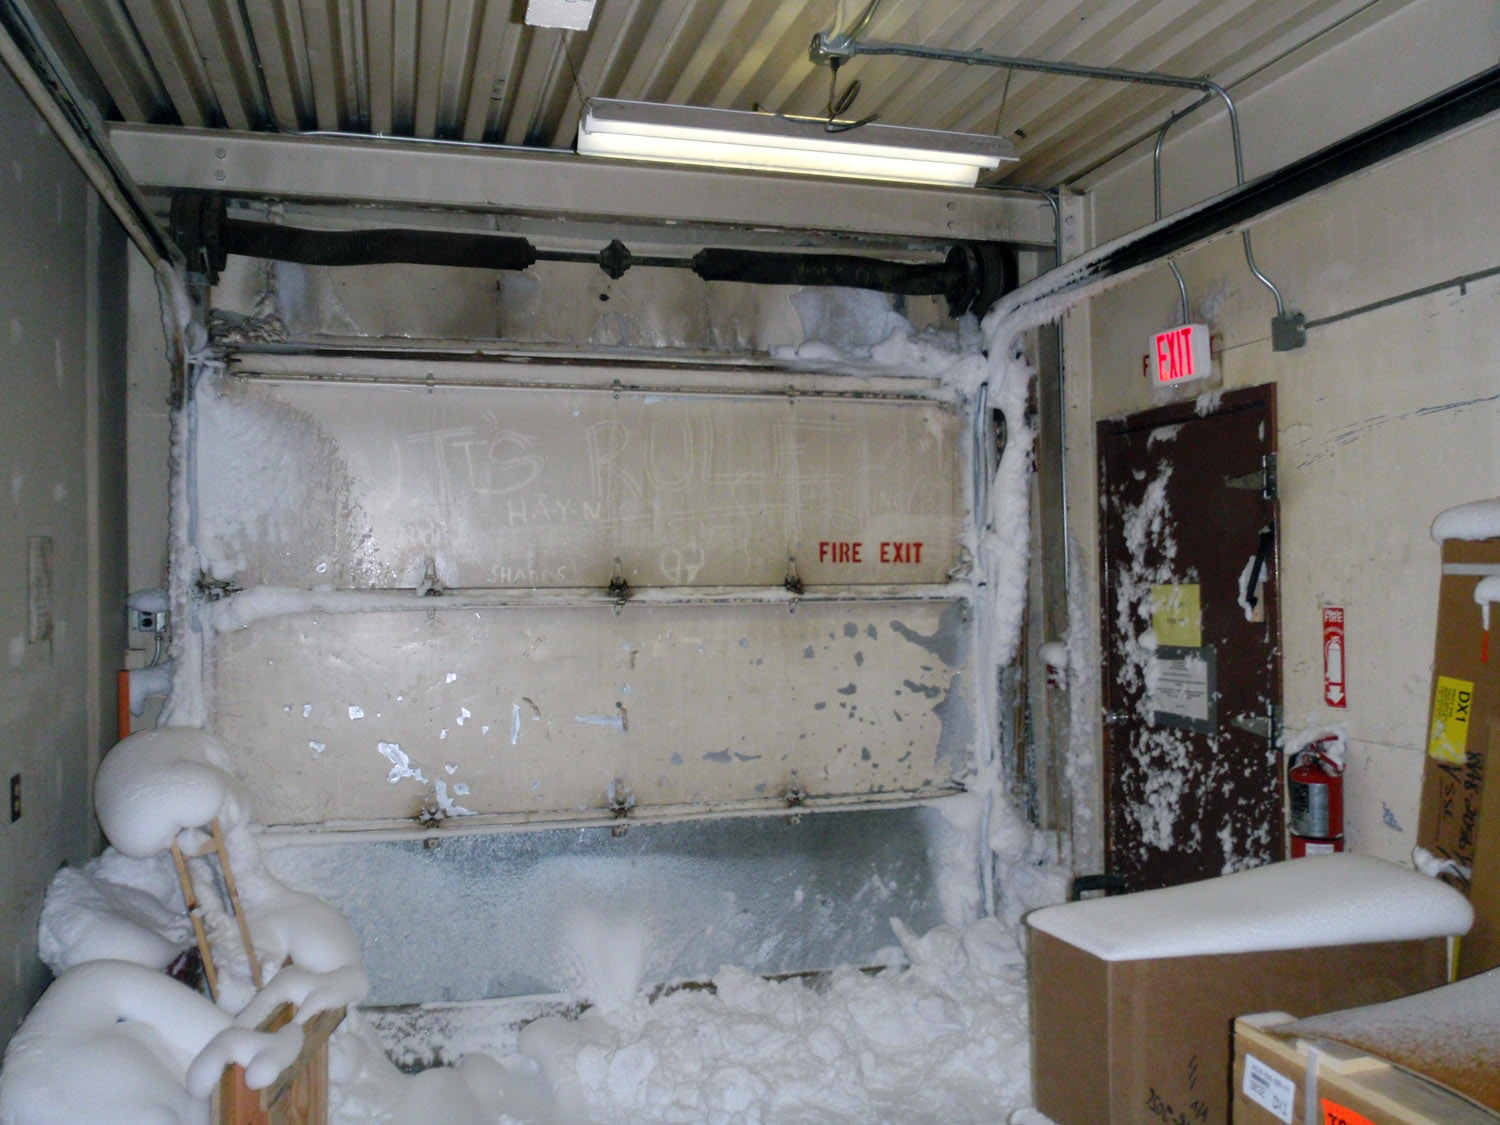 Inside Building 136, after a Condition 1 Storm